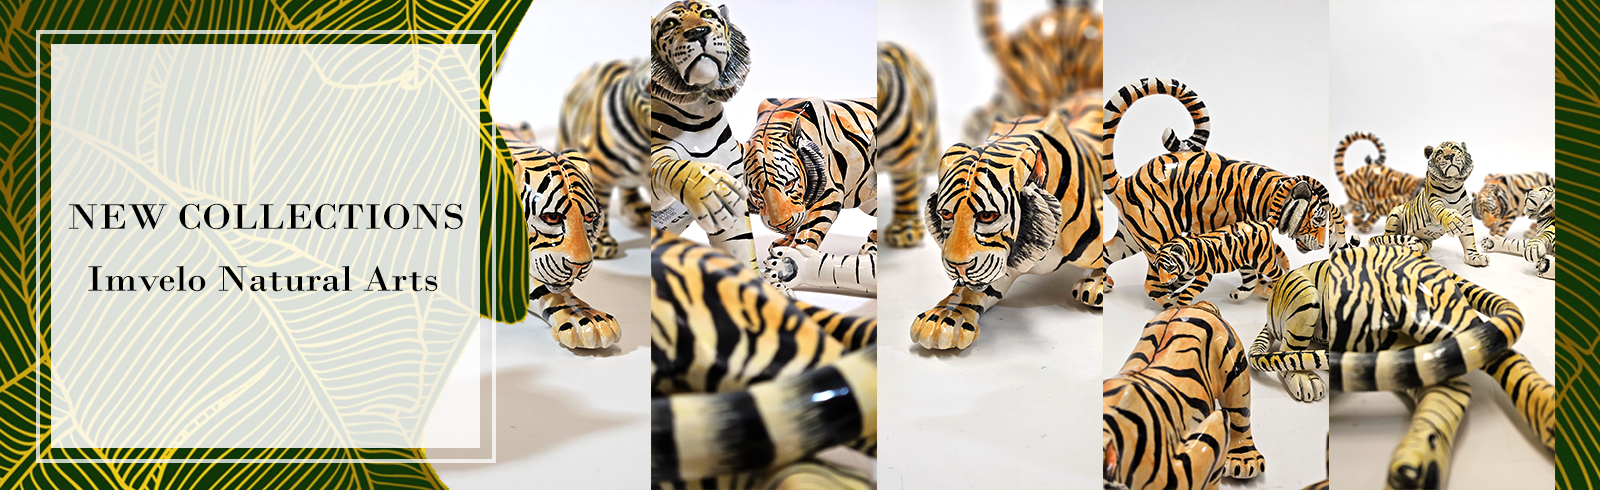 Unravel the Wilderness with Imvelo Natural Arts’ New Collections: Ornaments and Tiger Sculptures